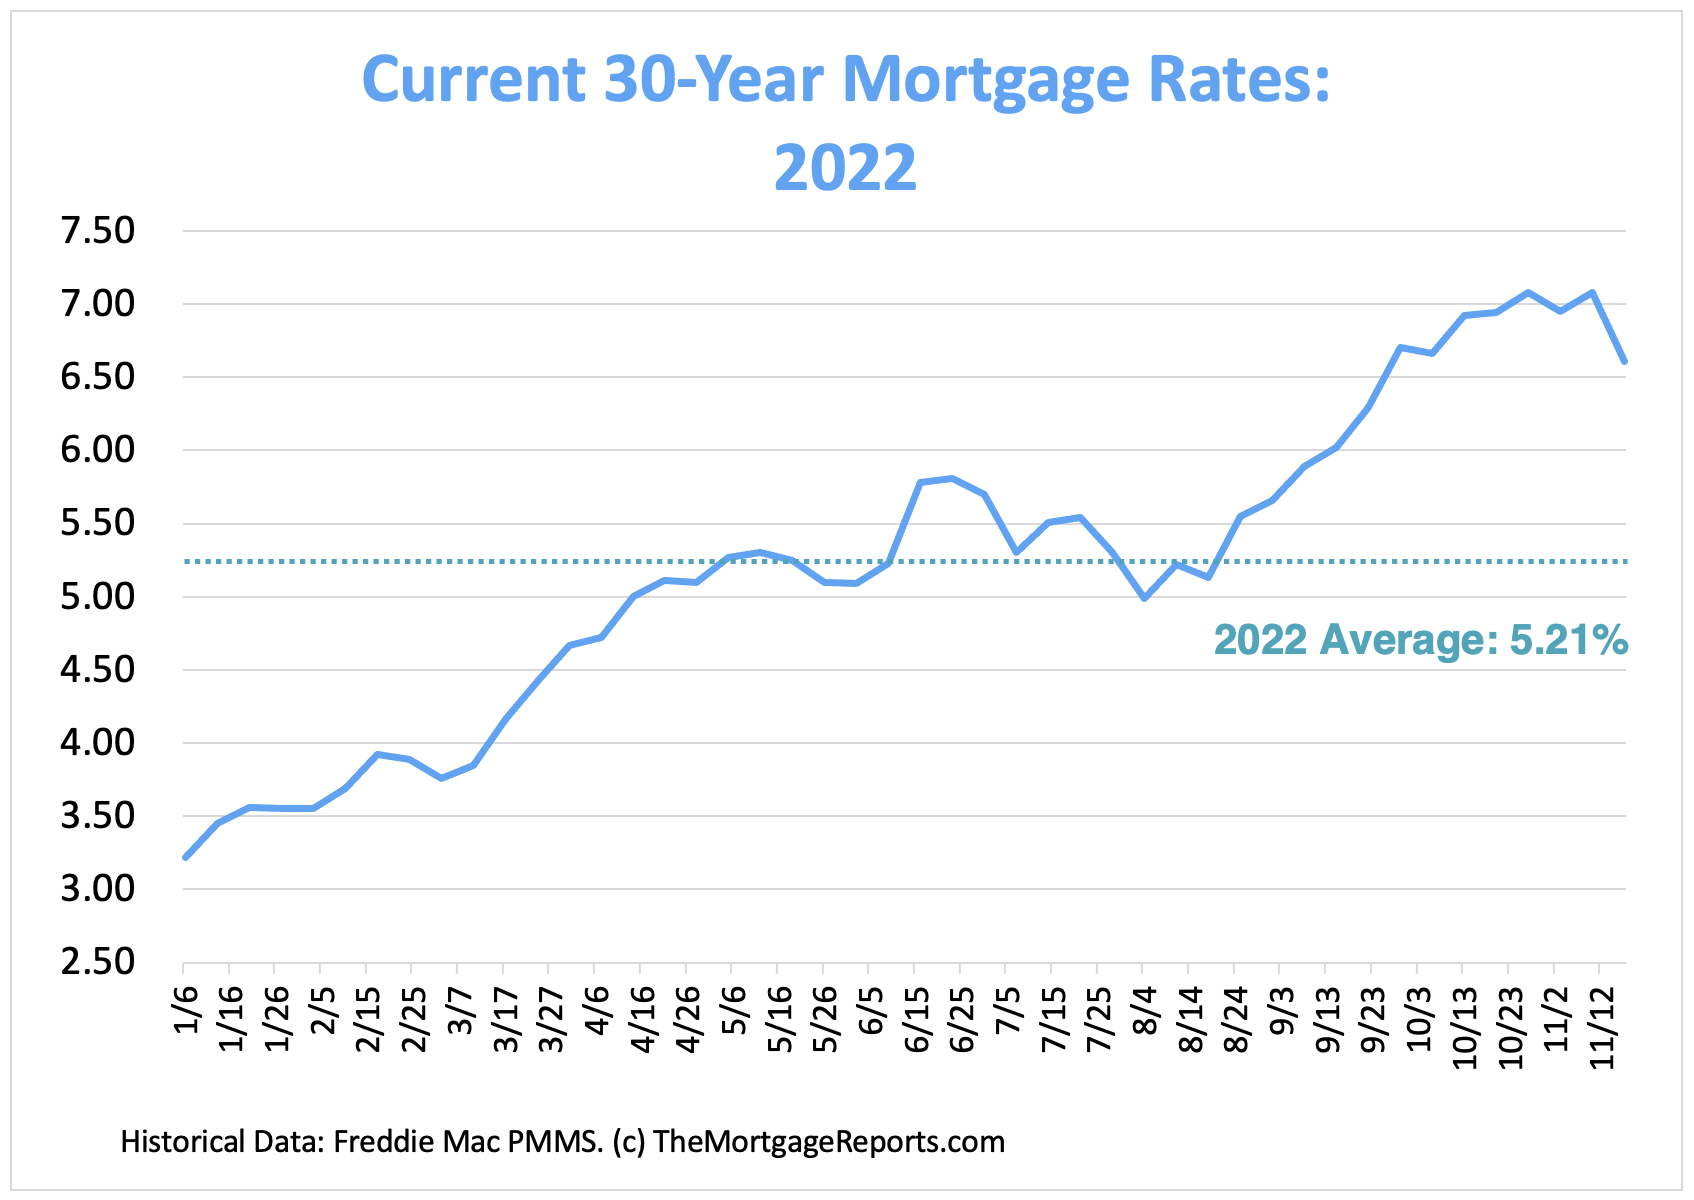 Current 30-year mortgage rates chart showing average rates from January to November 18, 2022. Rates rose above 7% then dropped sharply for one week